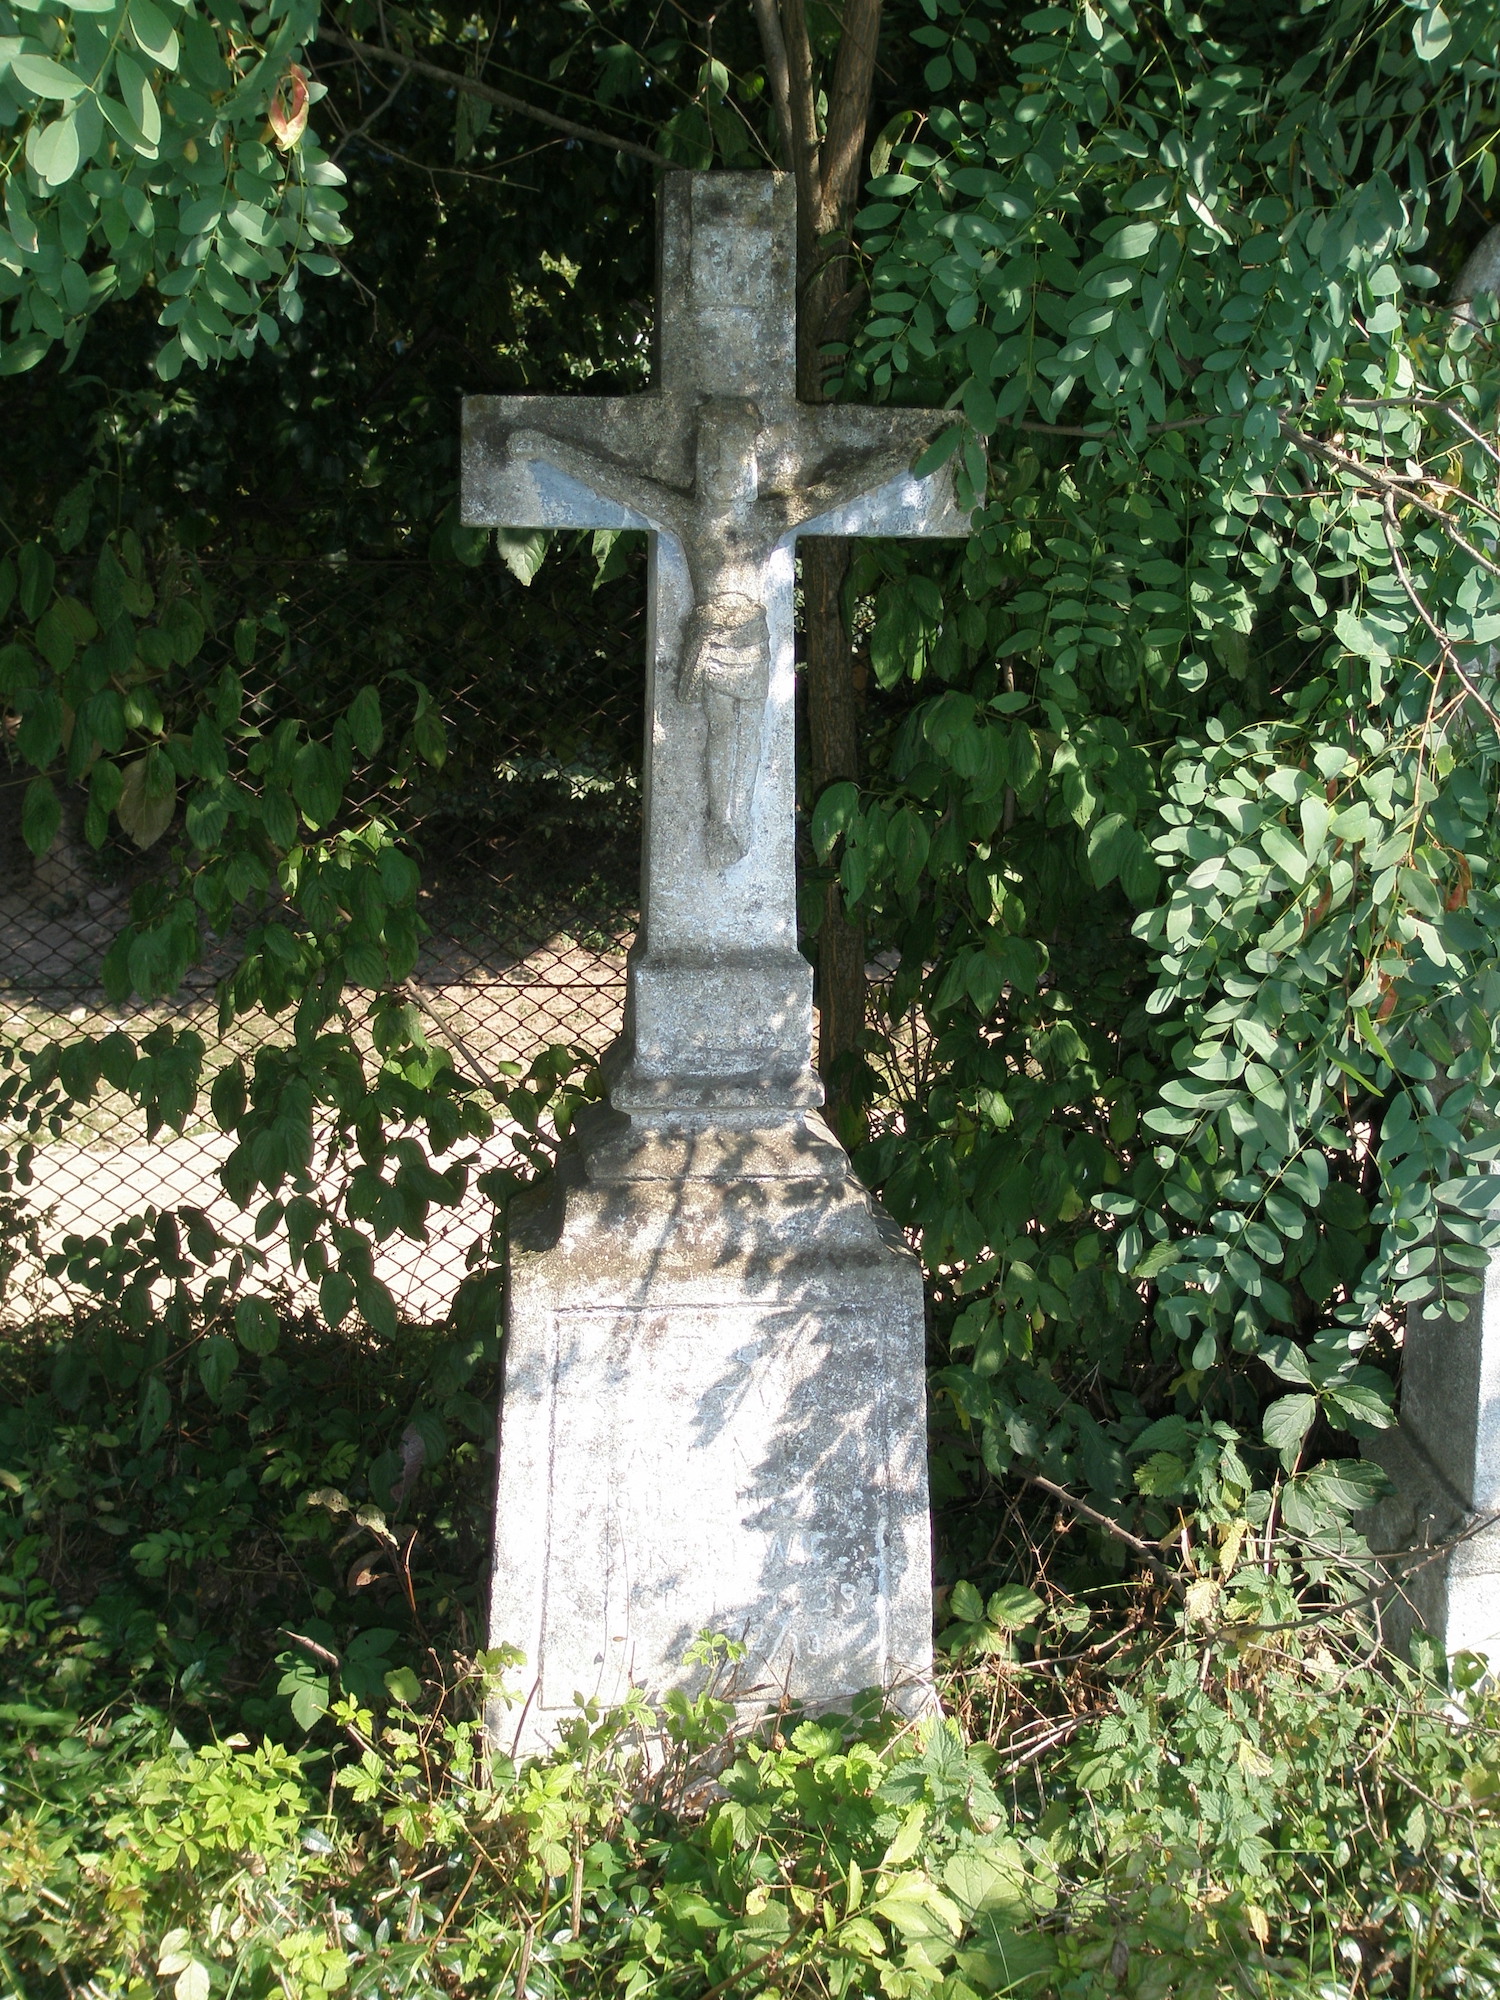 Tombstone of Anna Bartkiewicz, Barysh cemetery, as of 2006.